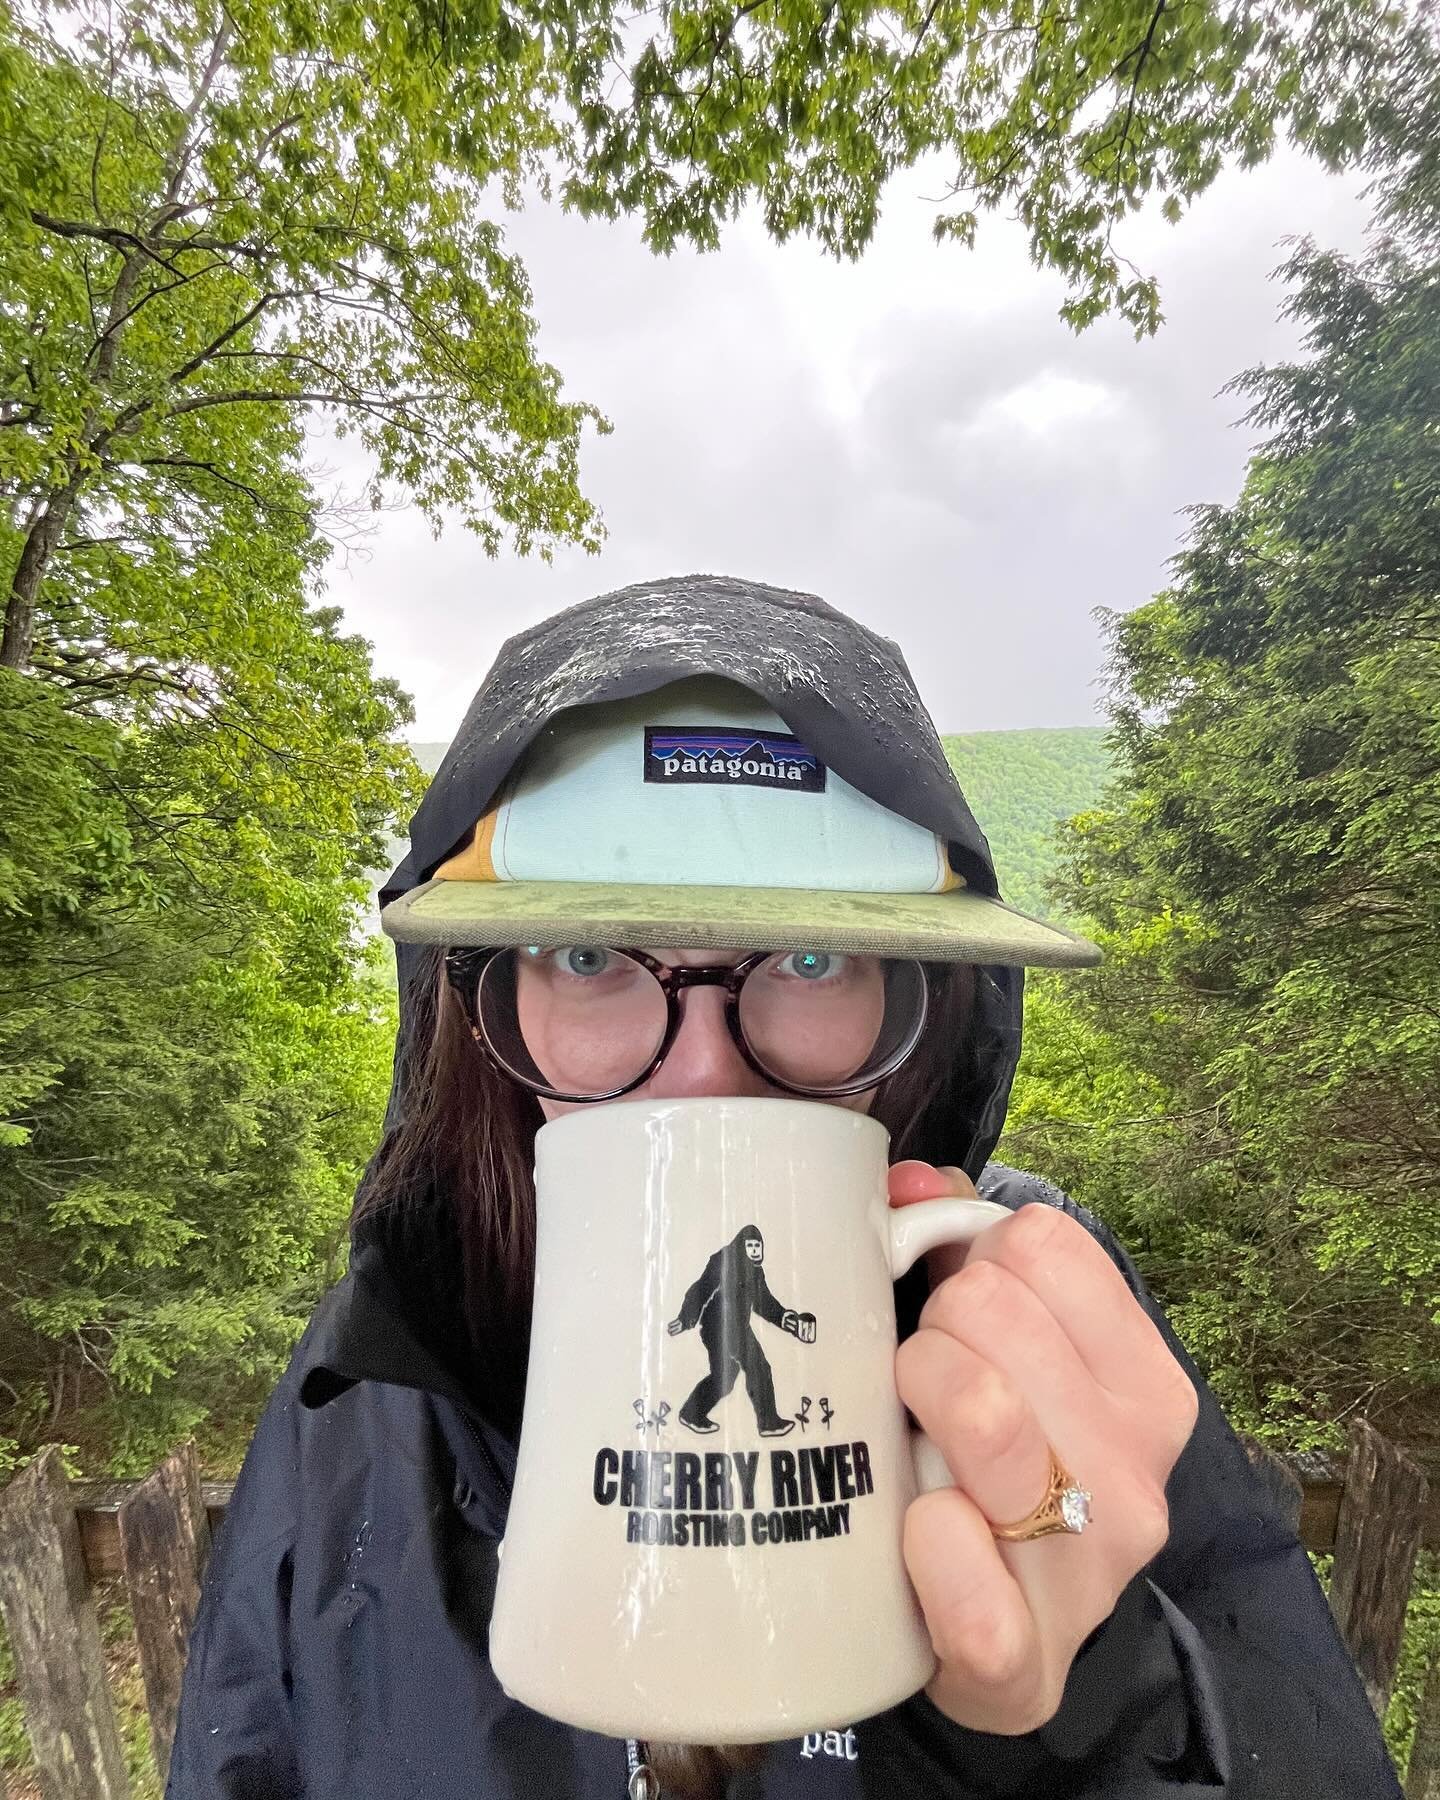 Nothing can stop us from getting our daily coffee in. Not even the Spring showers! That&rsquo;s the Cherry River Roasting way ☕️⛈️
.
.
.
.
.
.
#visitrichwood #richwood #richwoodwv #summersville #summersvillelake #summersvillewv #visitsummersville #fa